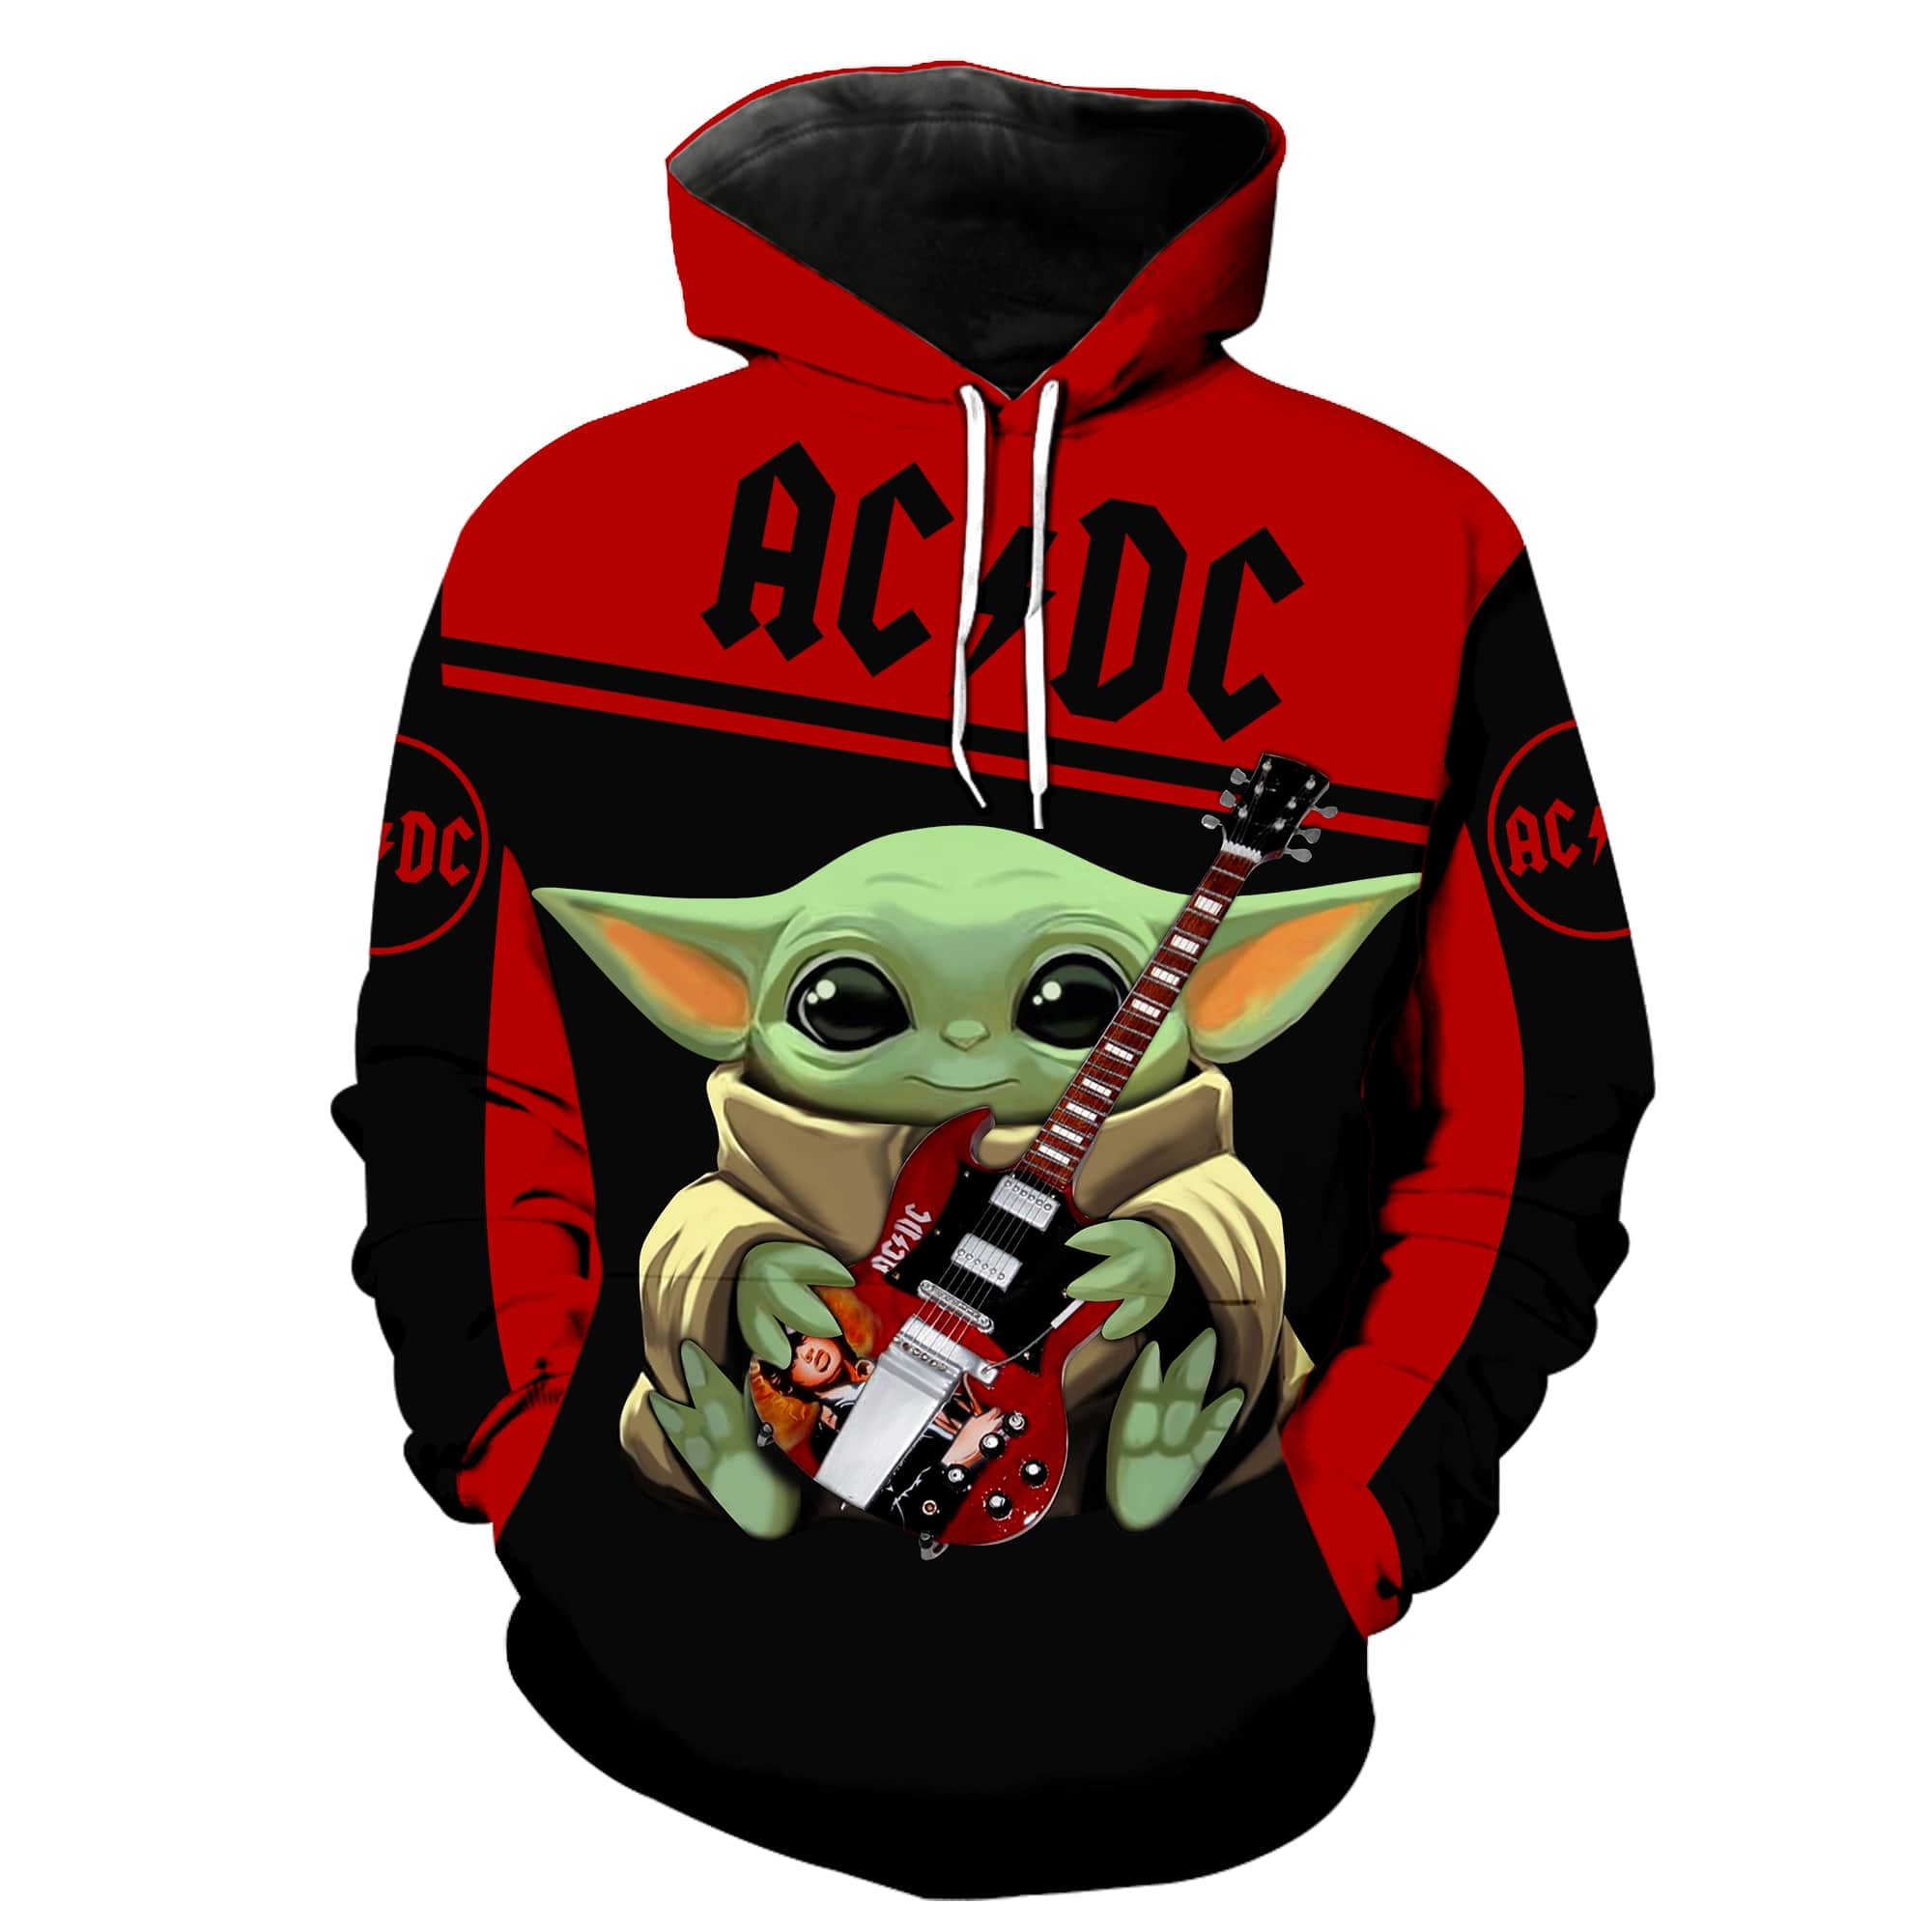 ACDC baby yoda all over print hoodie